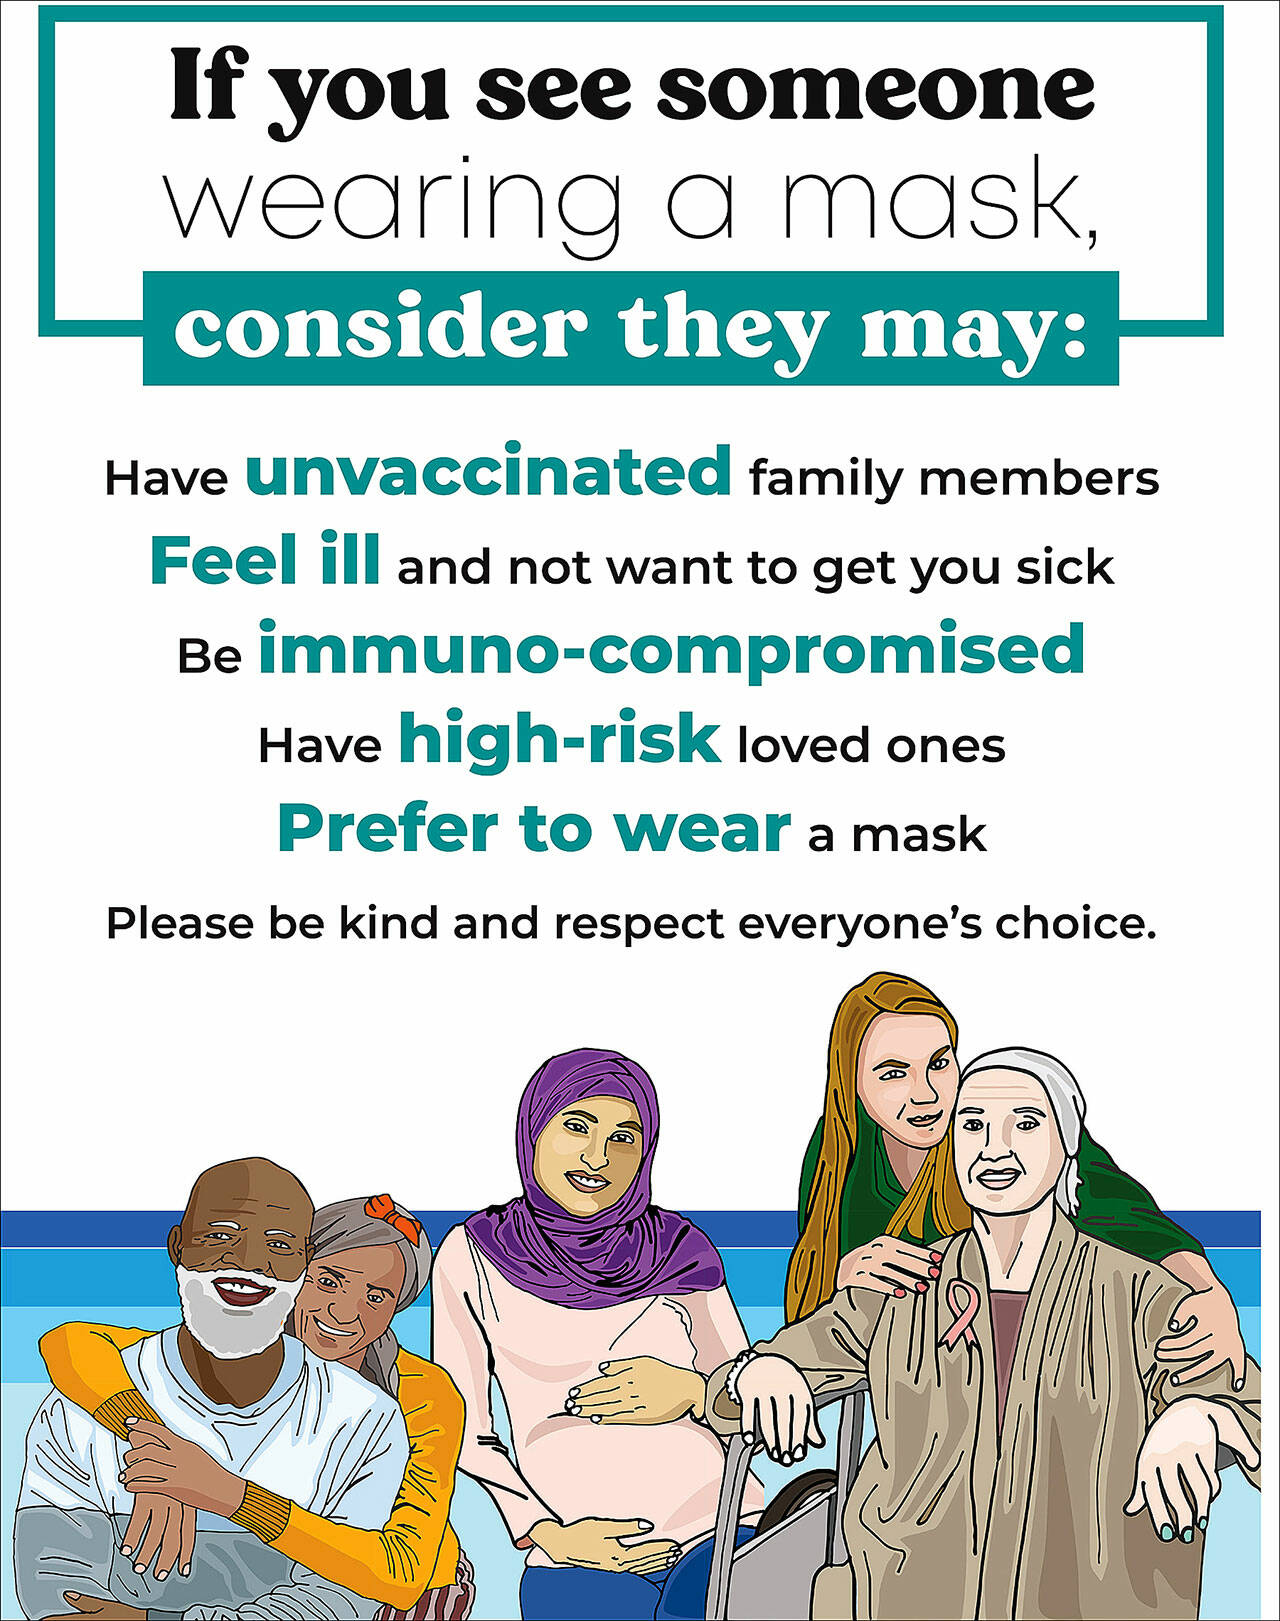 (Public Health Seattle King County Graphic) There’s more information on respecting those who choose to wear masks, including tips, advice, and downloadable free posters like this one bit.ly/PHSKC_RespectMasks.